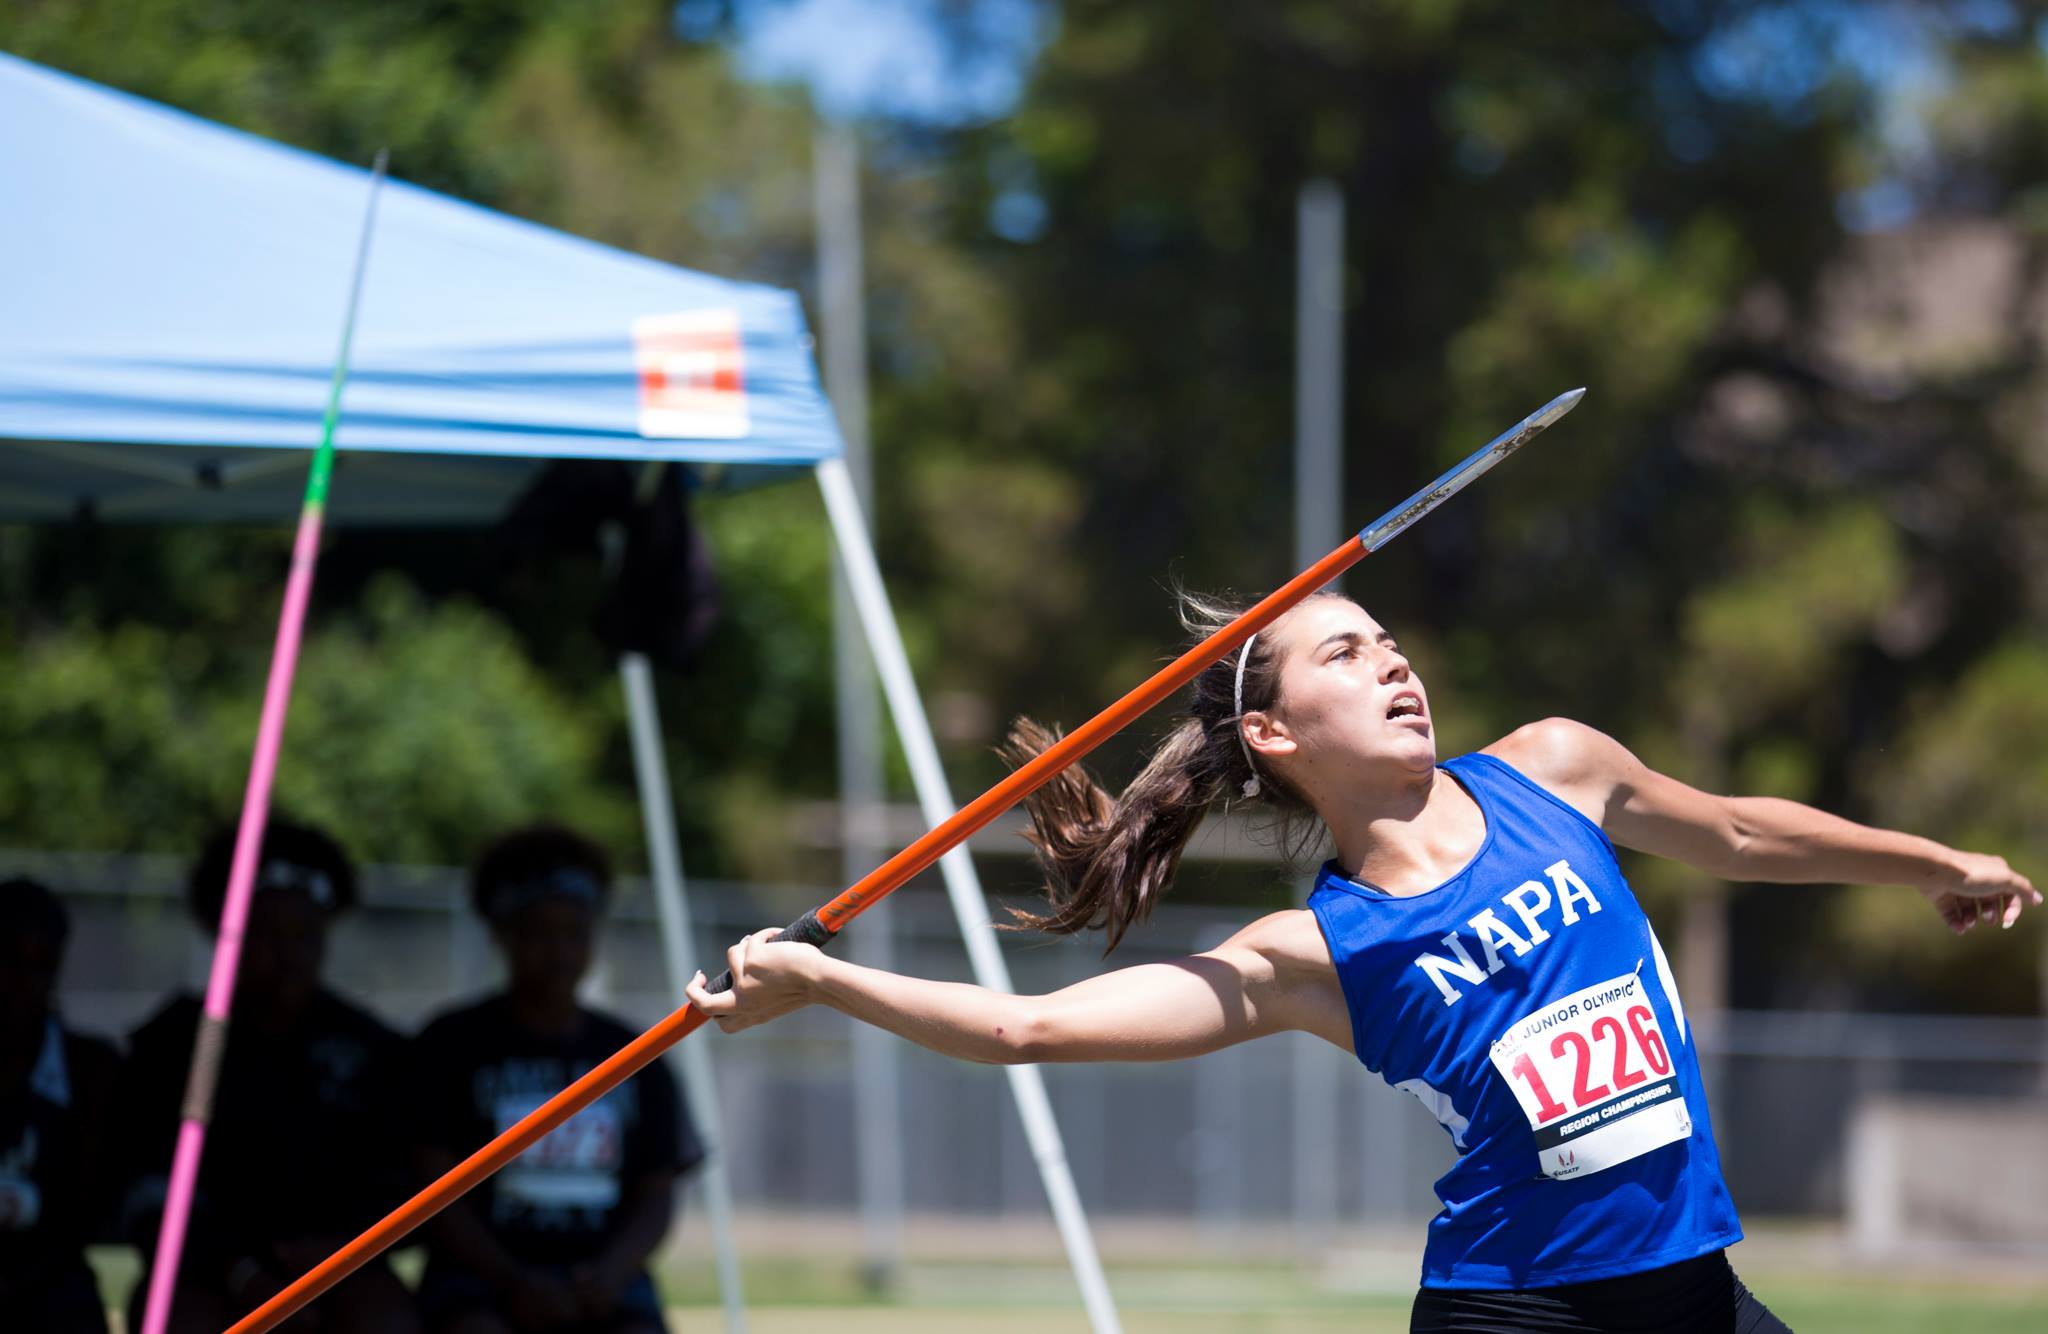 A female competitor with a blue jersey that reads "Napa" prepares to throw a javelin during a USATF National Junior Olympic Track & Field Championships event at Sac State's Hornet Stadium.